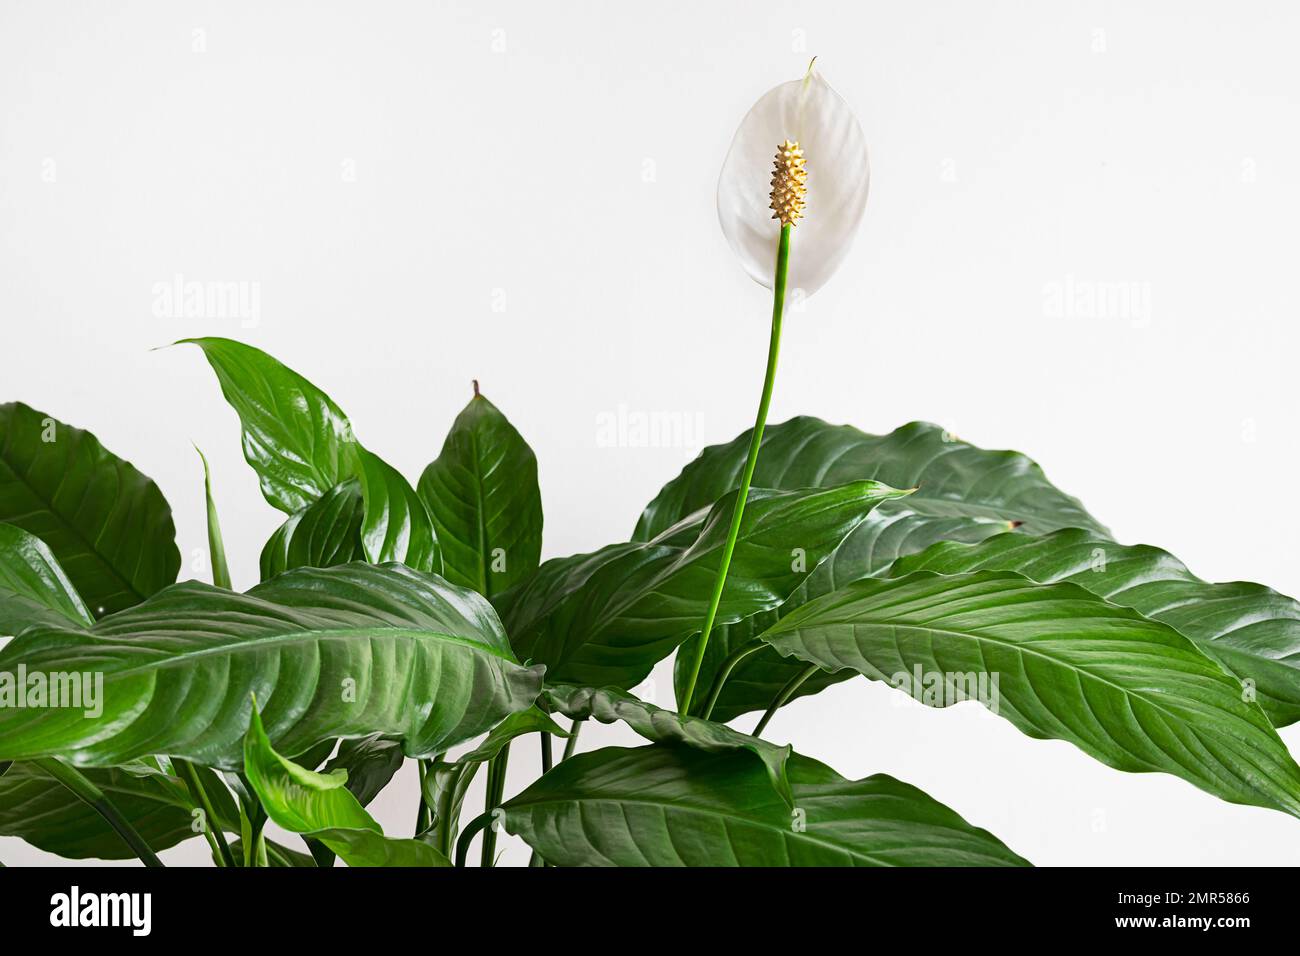 Blooming Spathiphyllum or Peace lily plant close-up, home gardening and connecting with nature Stock Photo